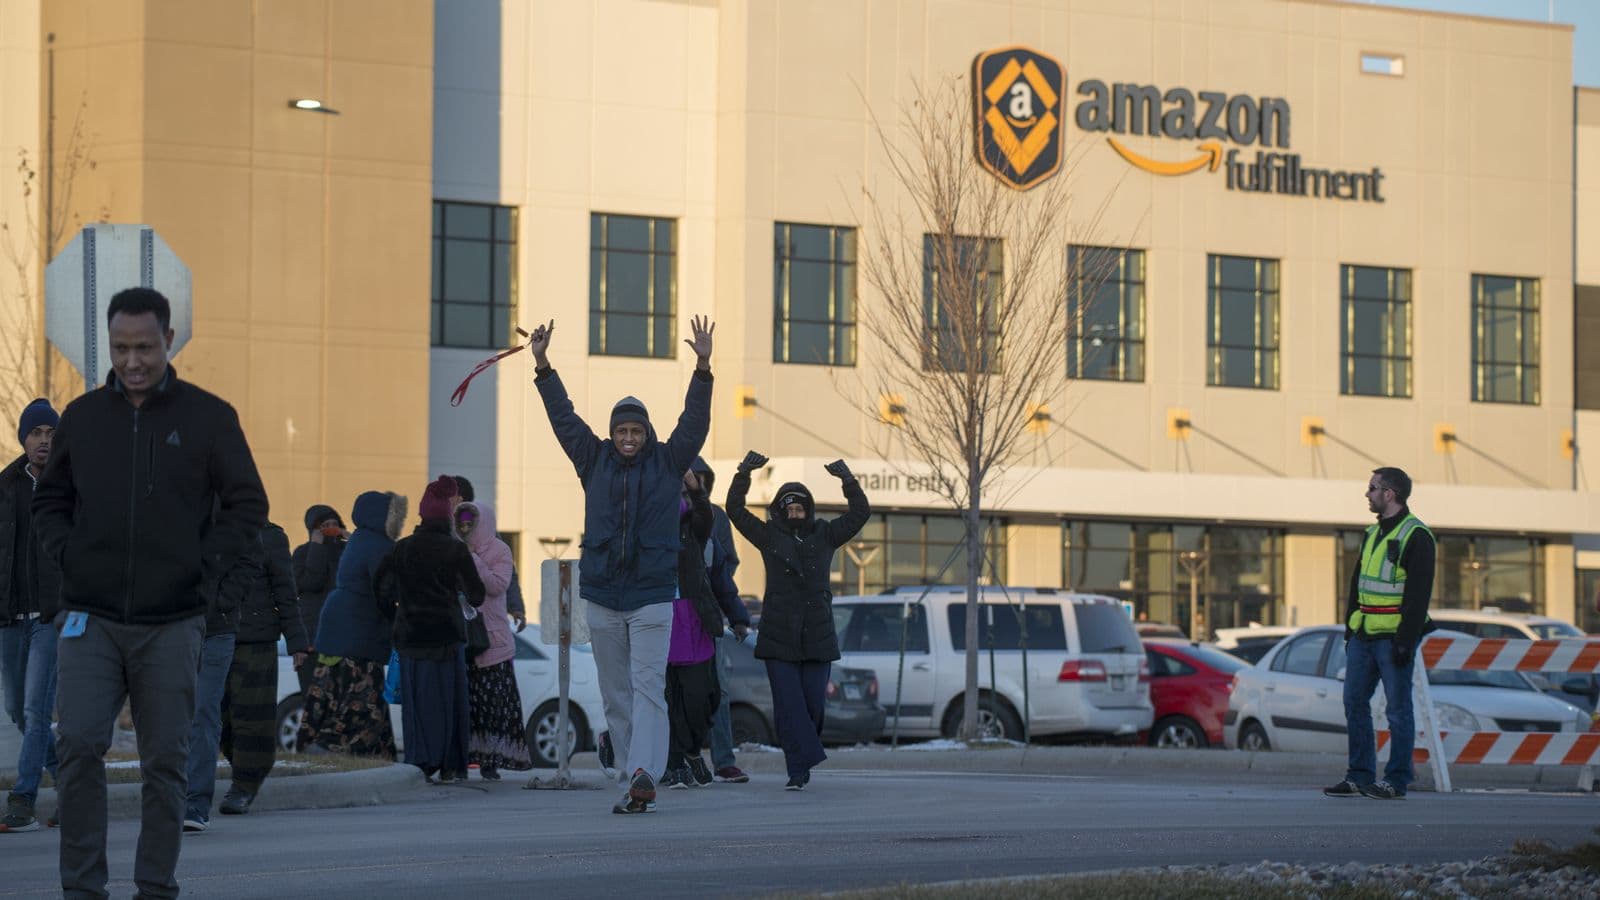 Amazon workers protesting in Minnesota. 